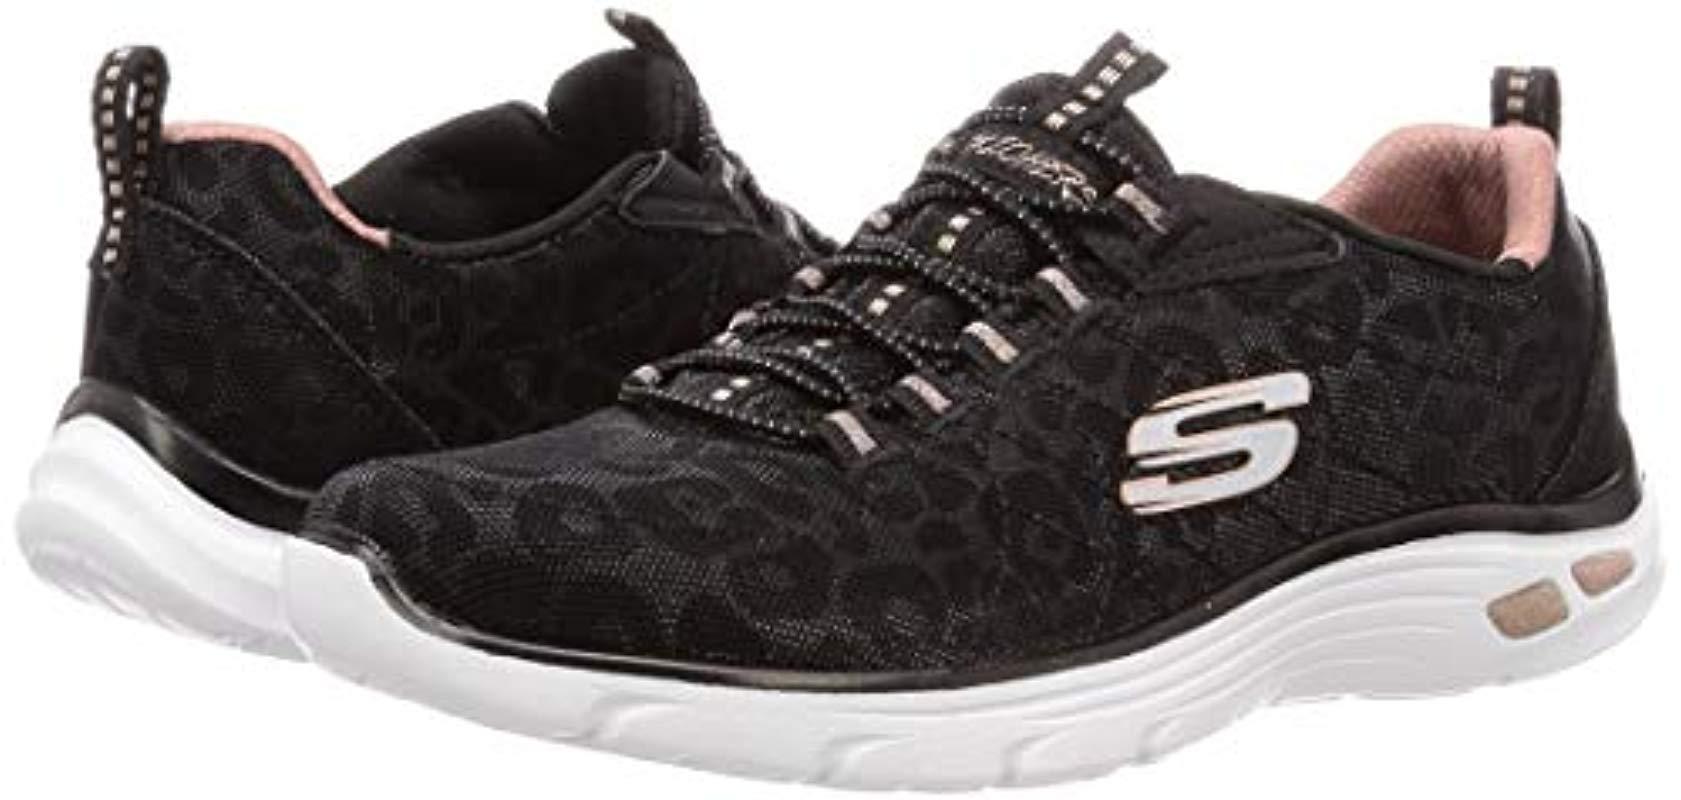 Skechers Empire D'lux-spotted Trainers in Black/Red (Black) | Lyst